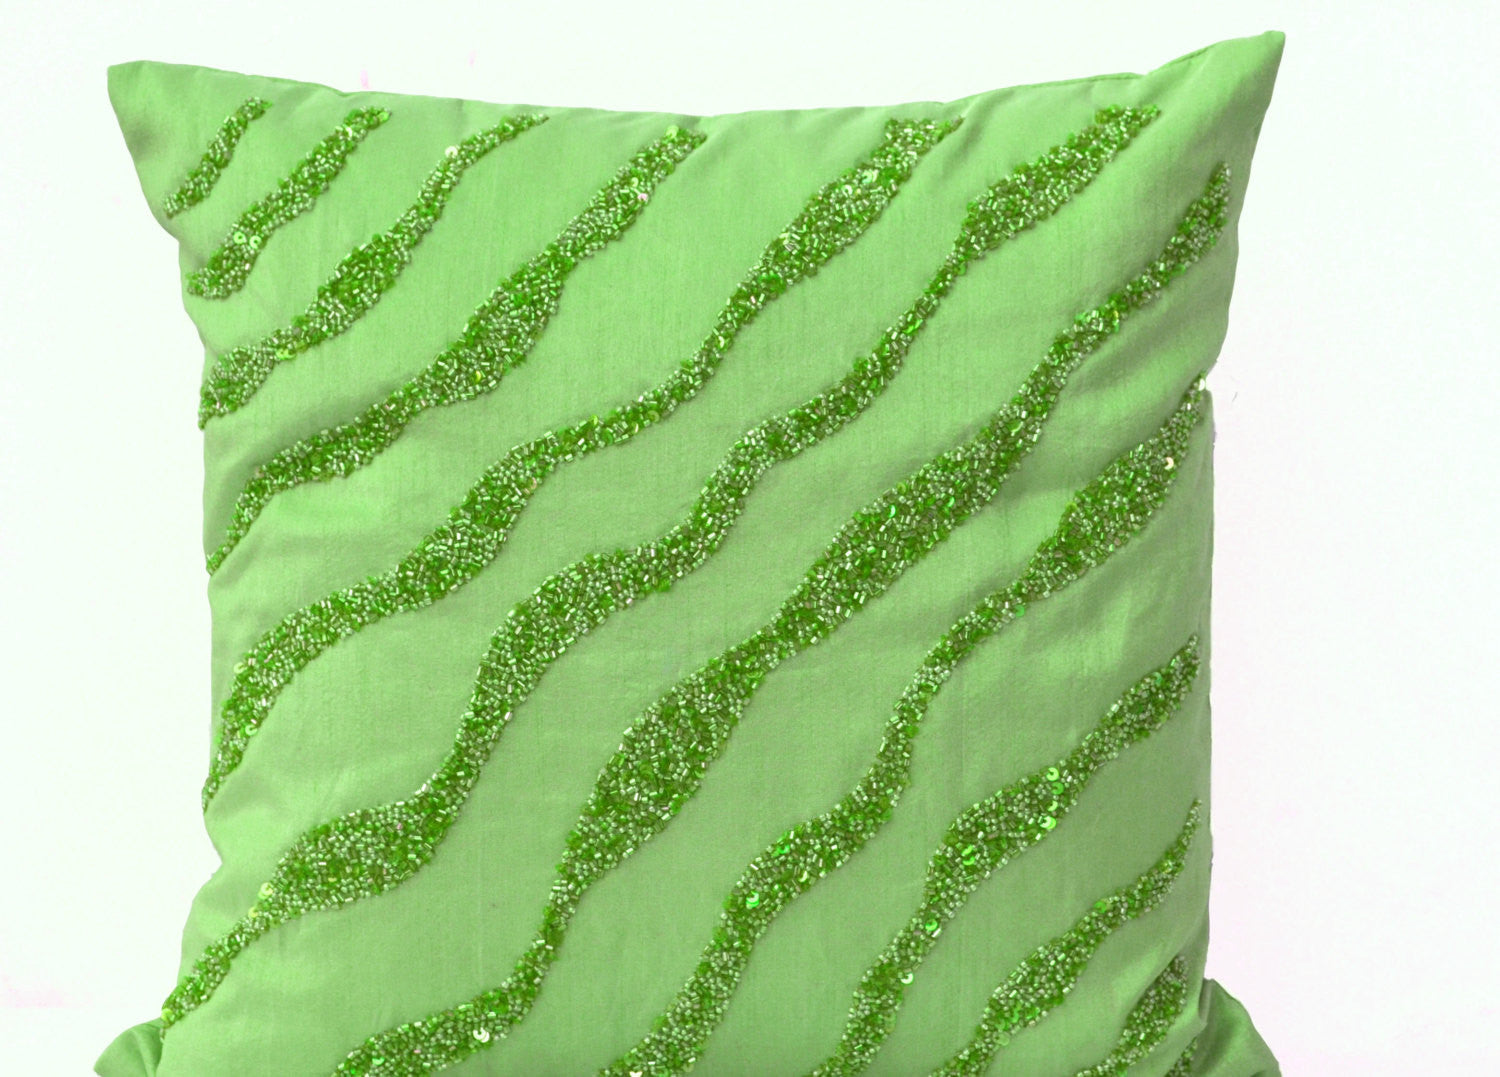 Handmade green throw pillows with beads and sequin